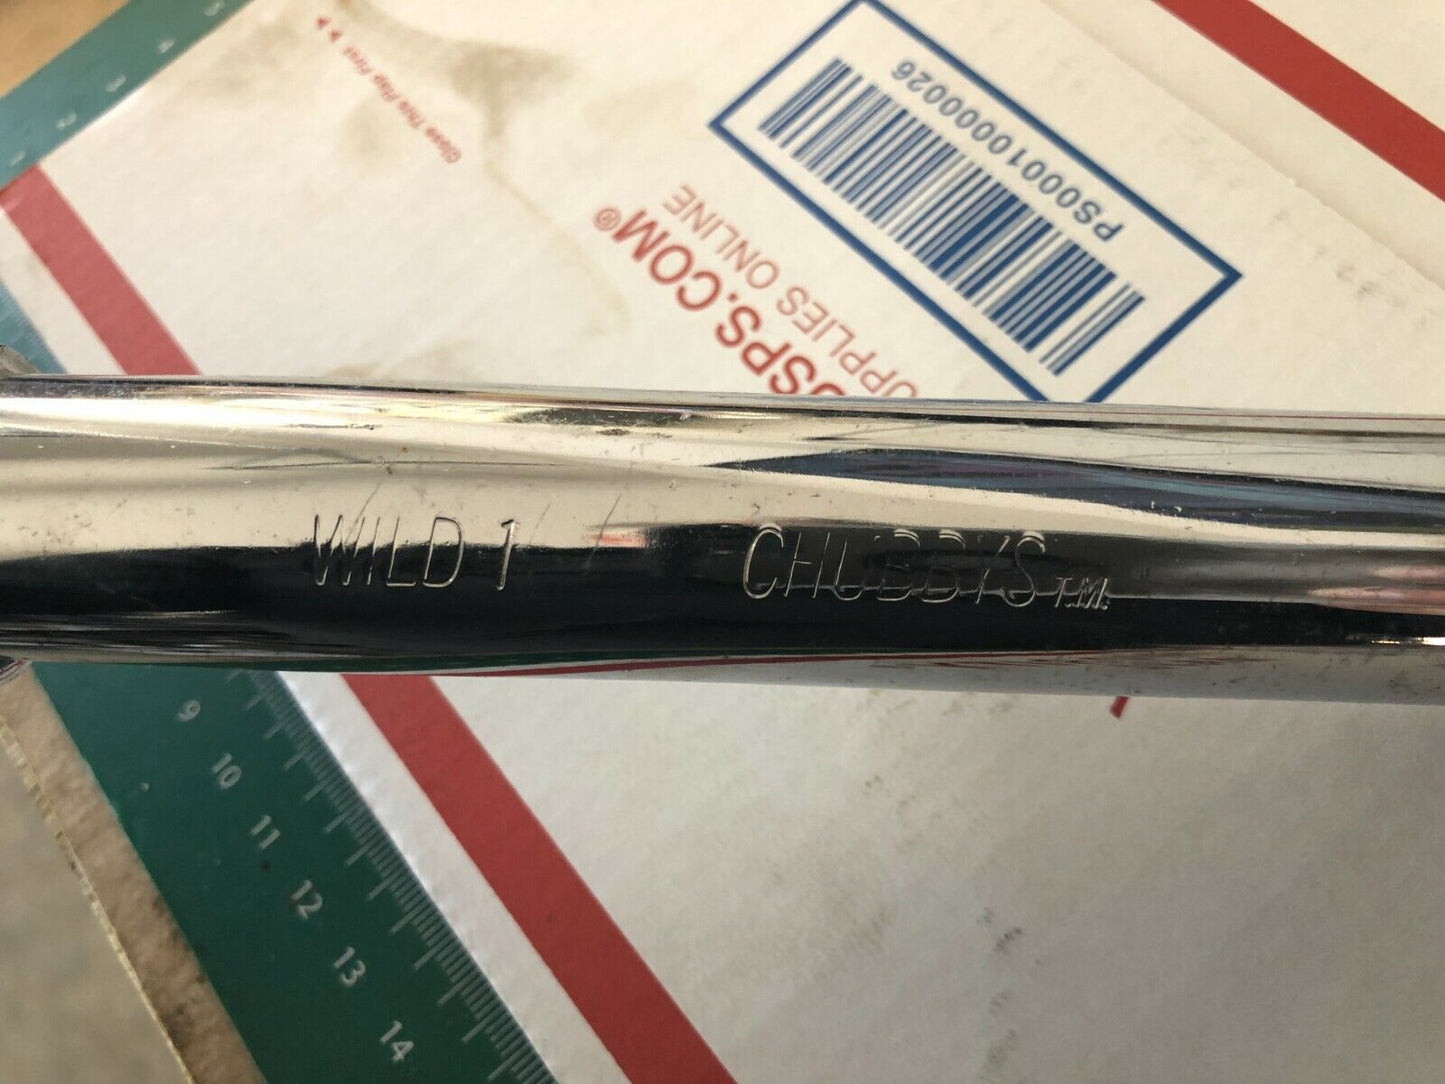 New Chubby Drag Bars 1 1/4" Dragster 31"